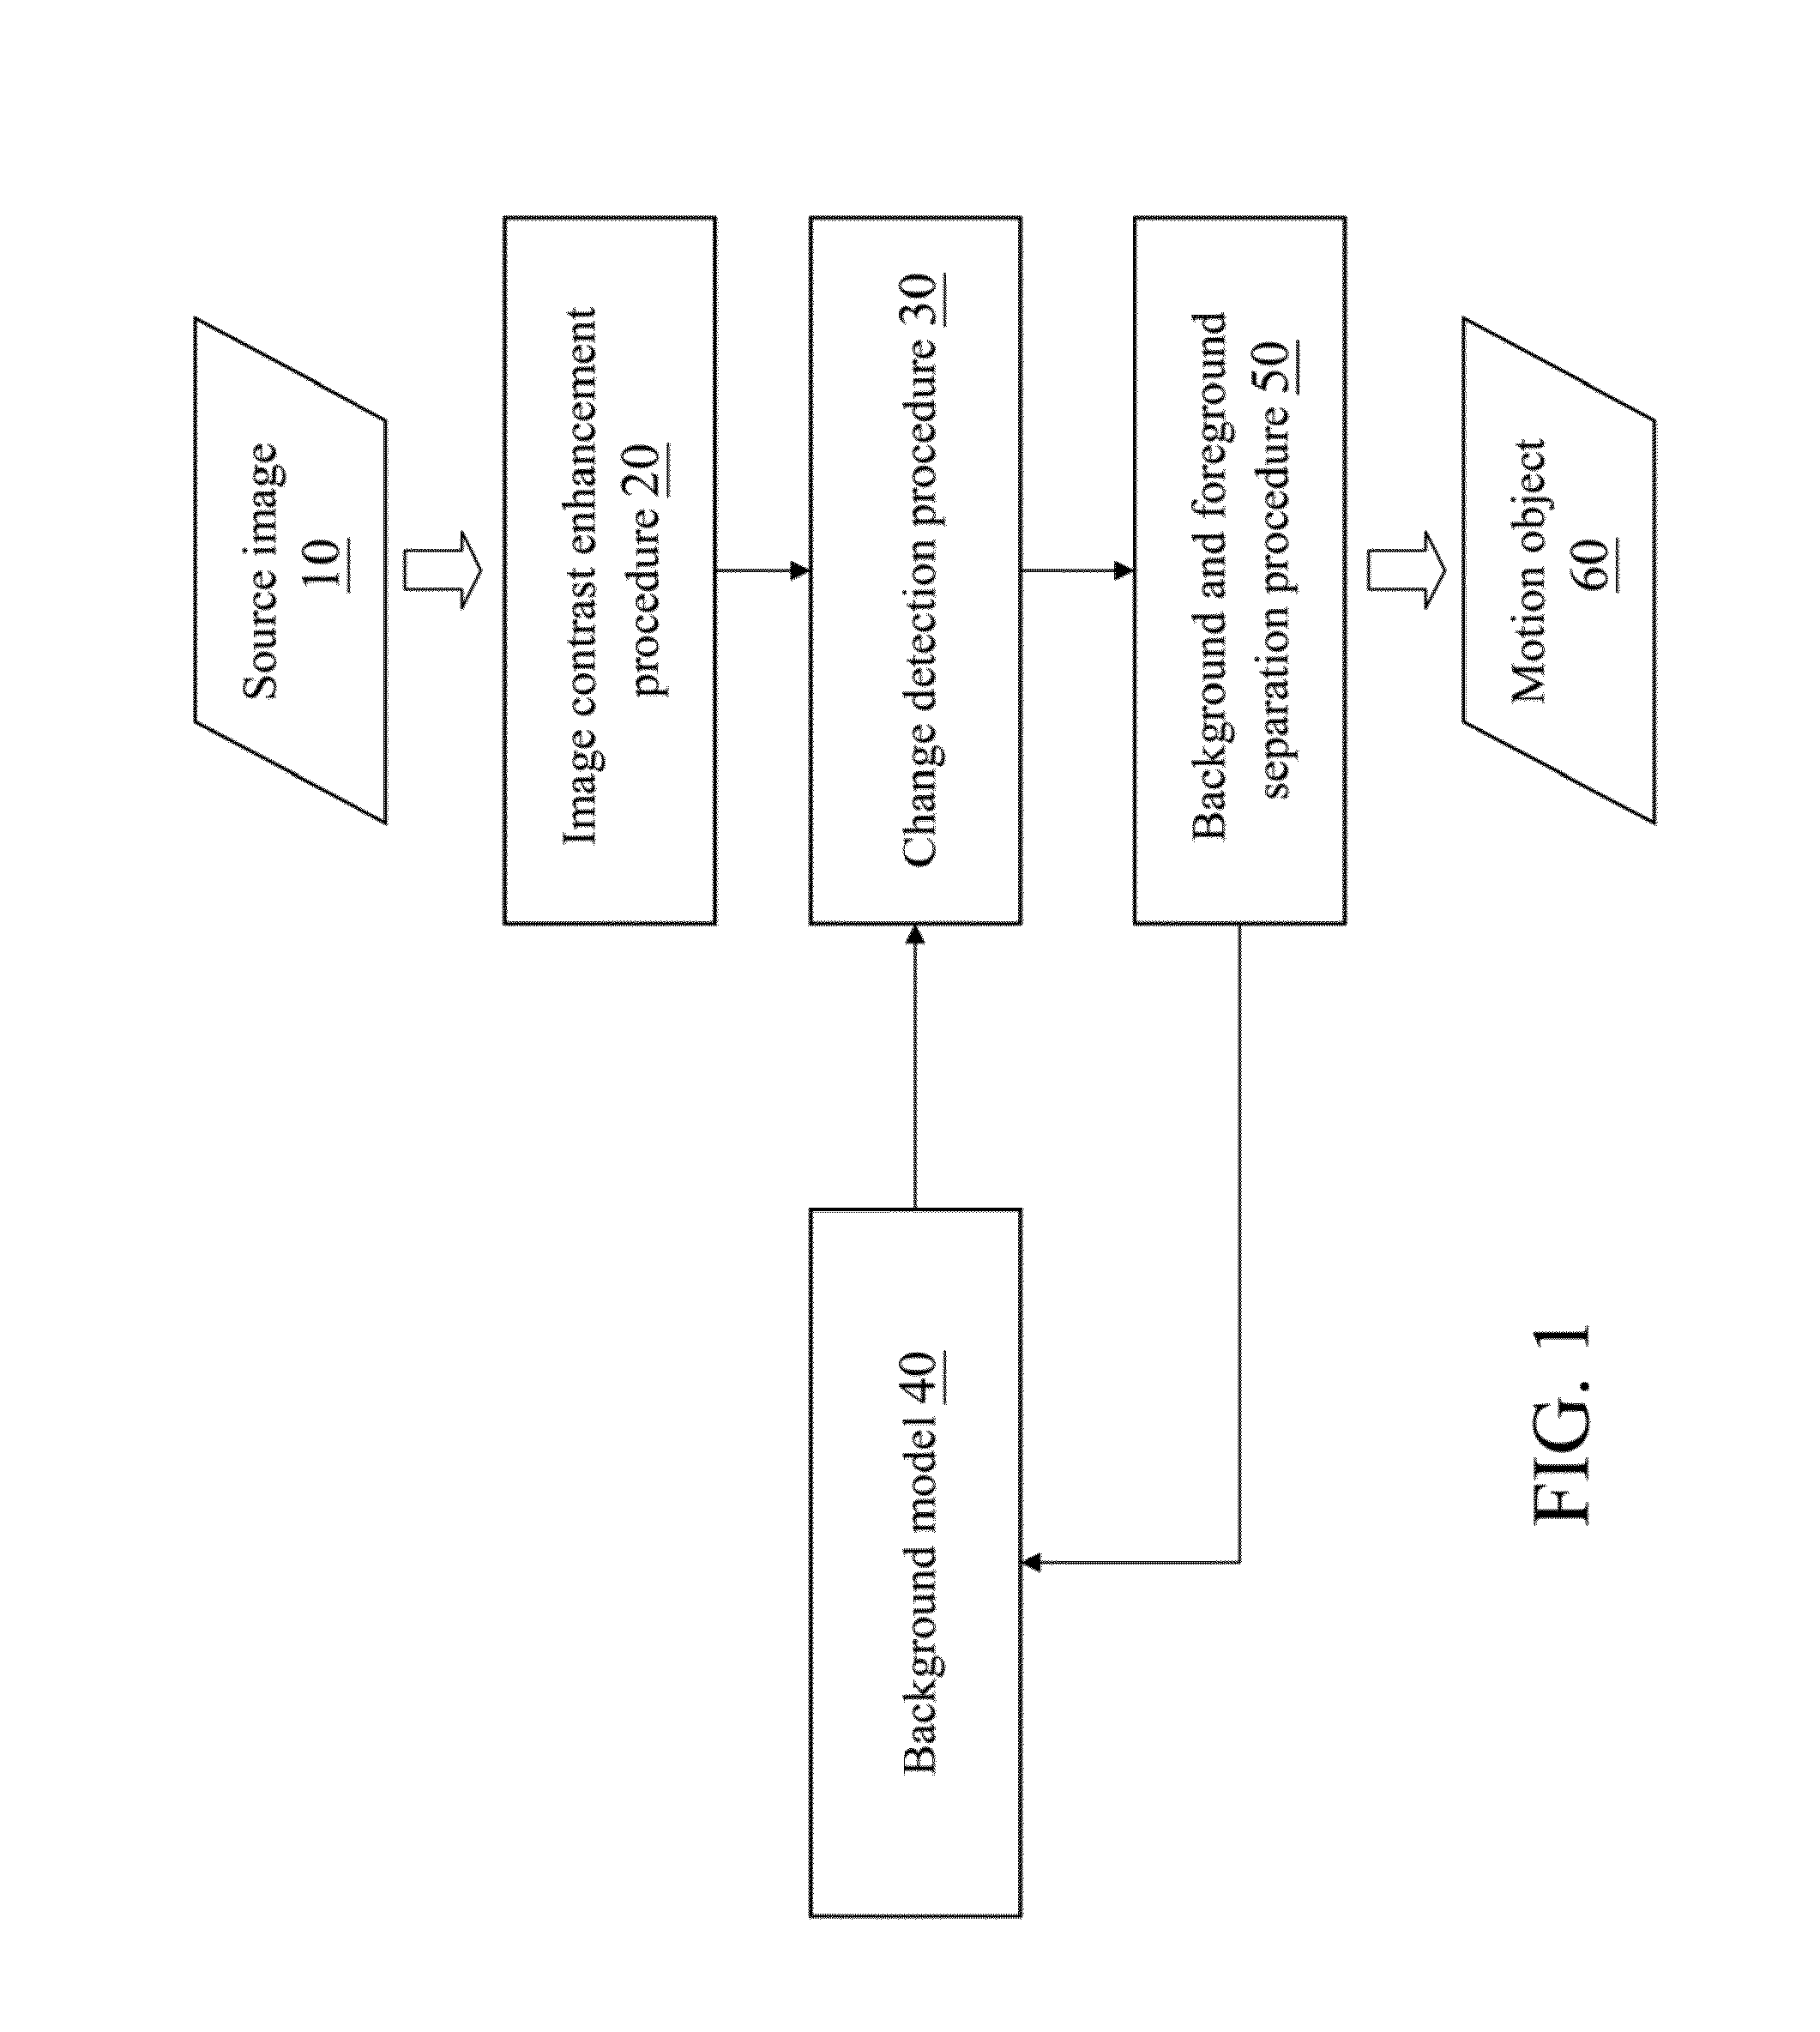 Moving object detection method using image contrast enhancement